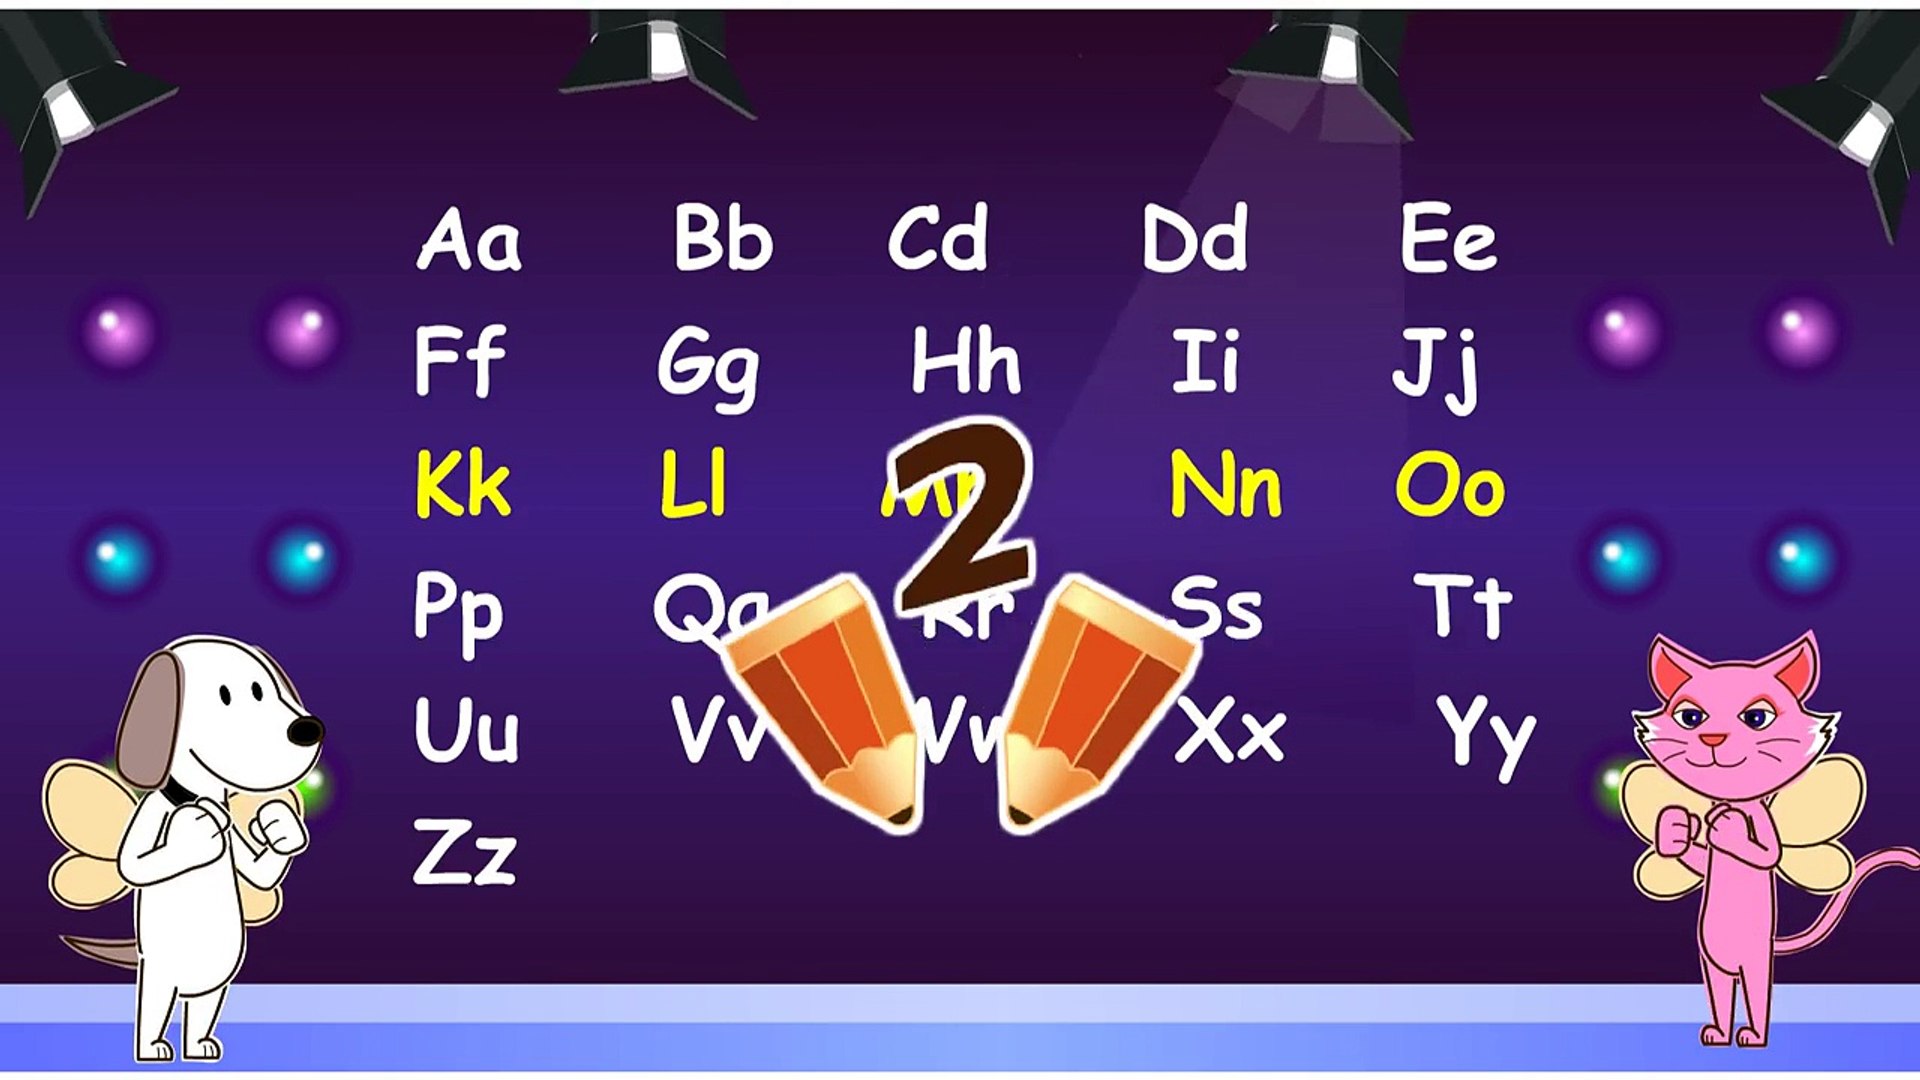 ABC Song 3 - Alphabet Song - English song for Kids - Sing along